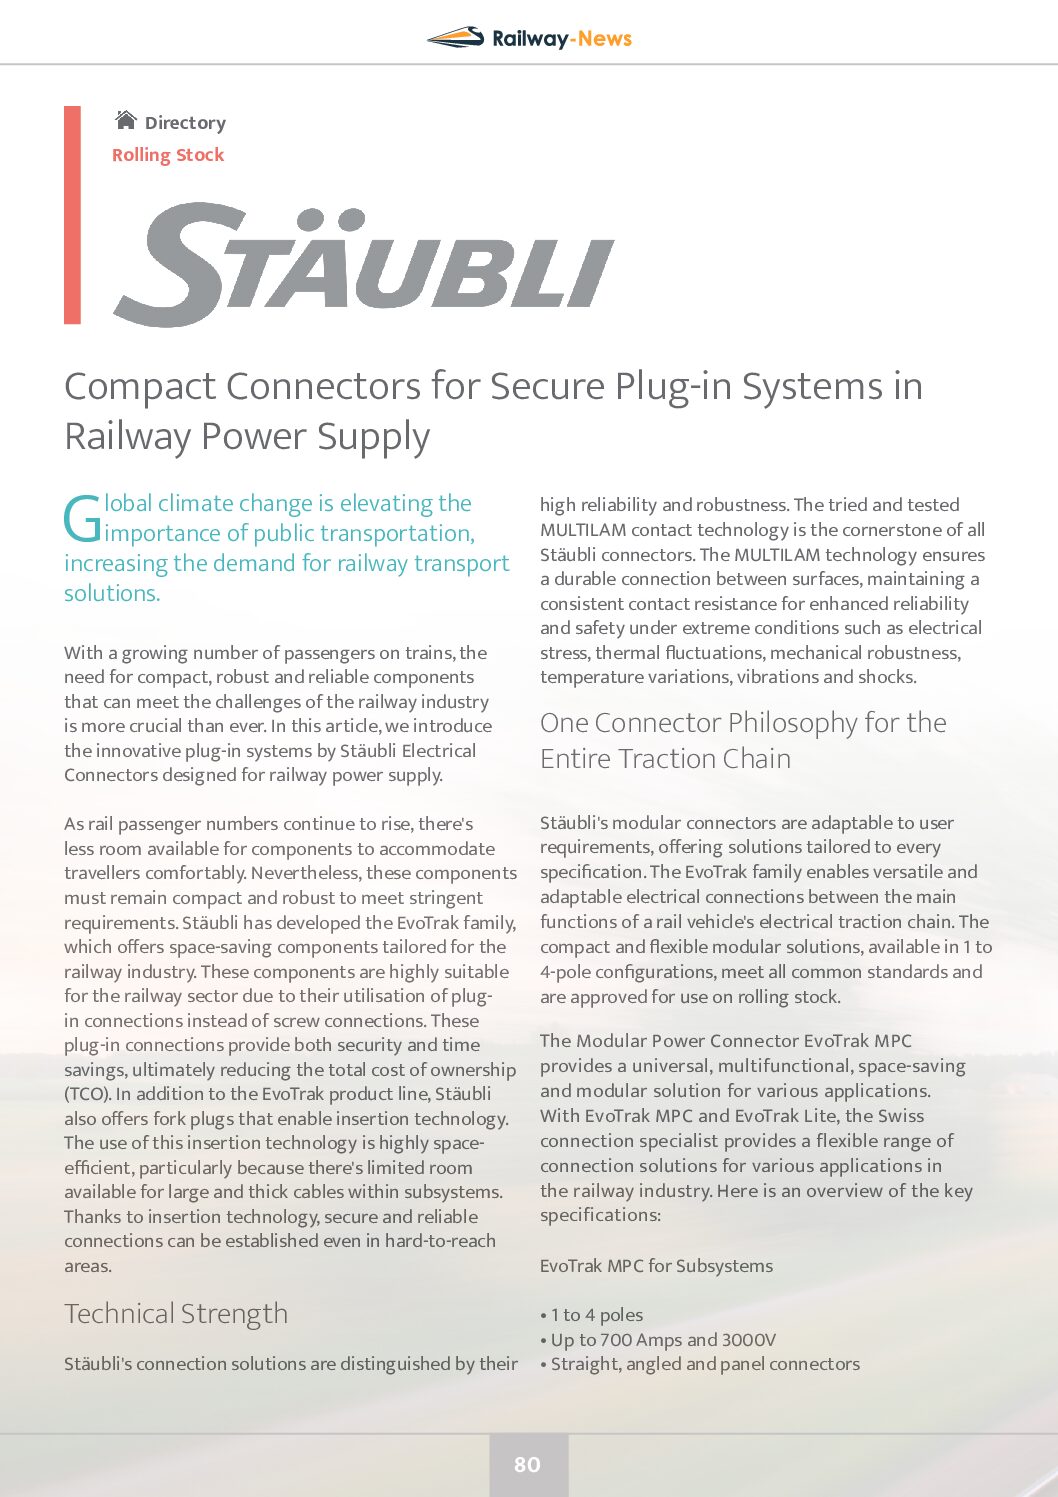 Compact Connectors for Secure Plug-in Systems in Railway Power Supply